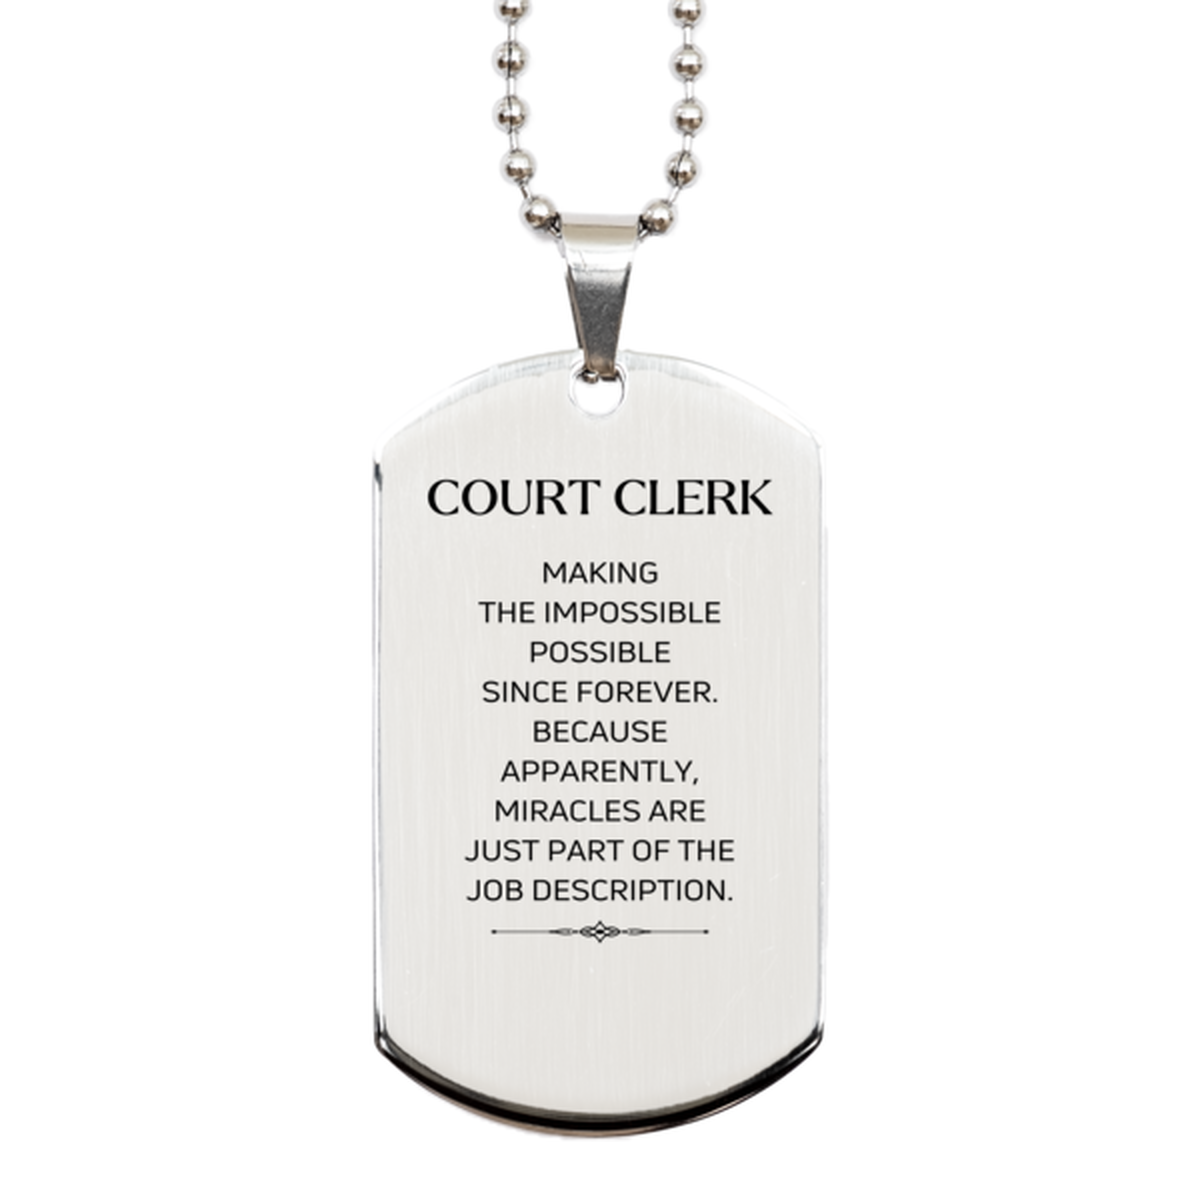 Funny Court Clerk Gifts, Miracles are just part of the job description, Inspirational Birthday Silver Dog Tag For Court Clerk, Men, Women, Coworkers, Friends, Boss